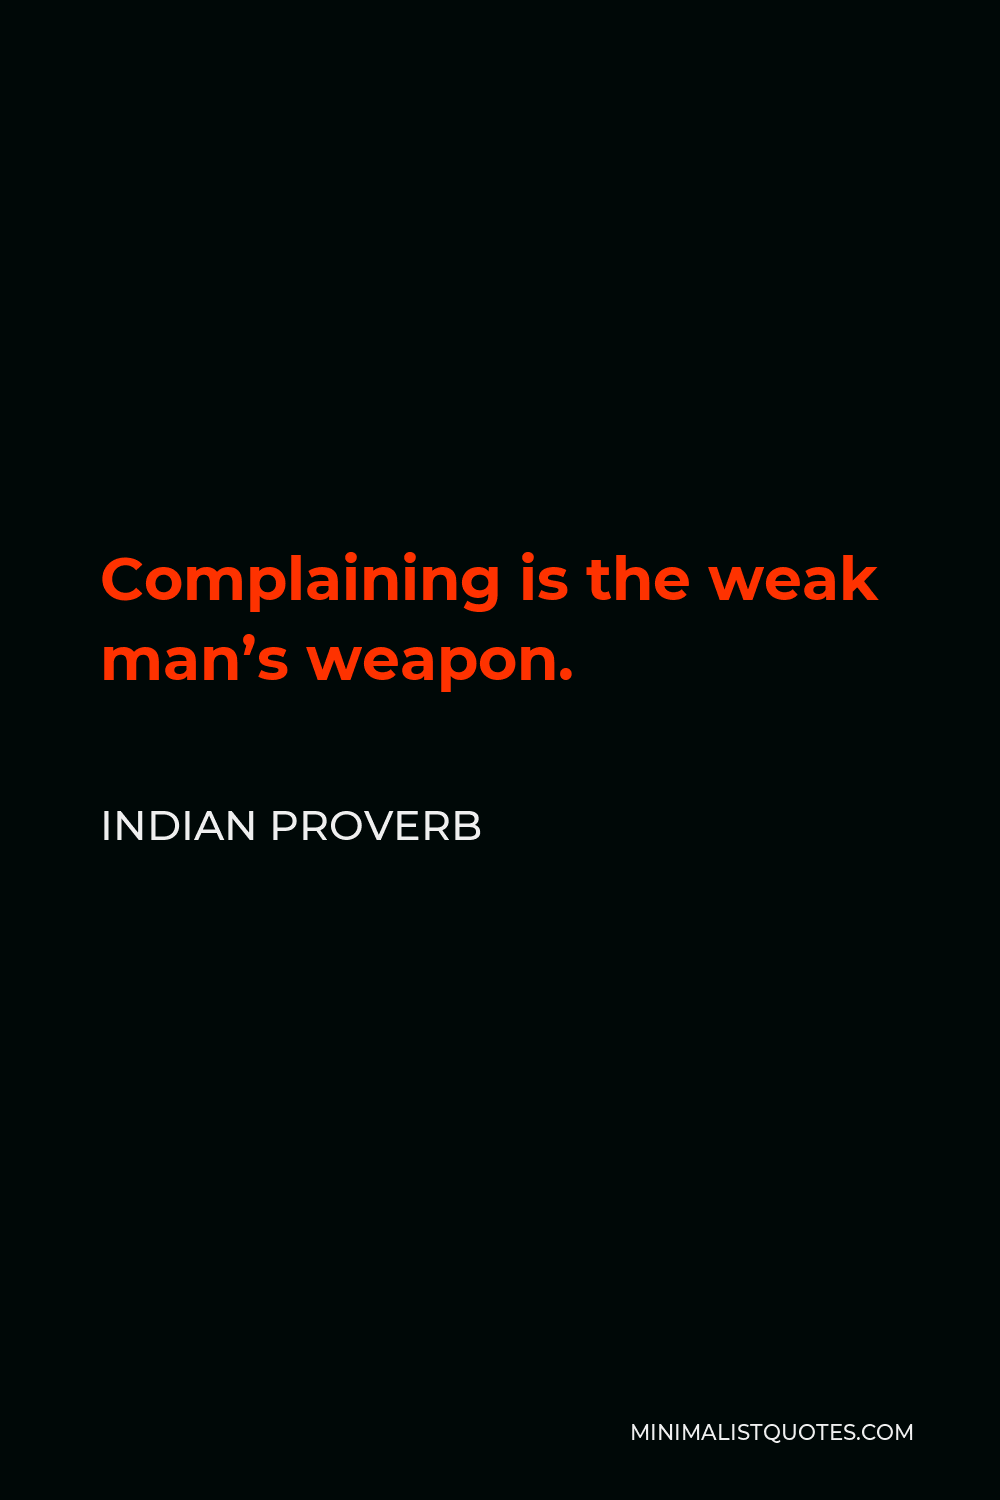 Indian Proverb Quote - Complaining is the weak man’s weapon.